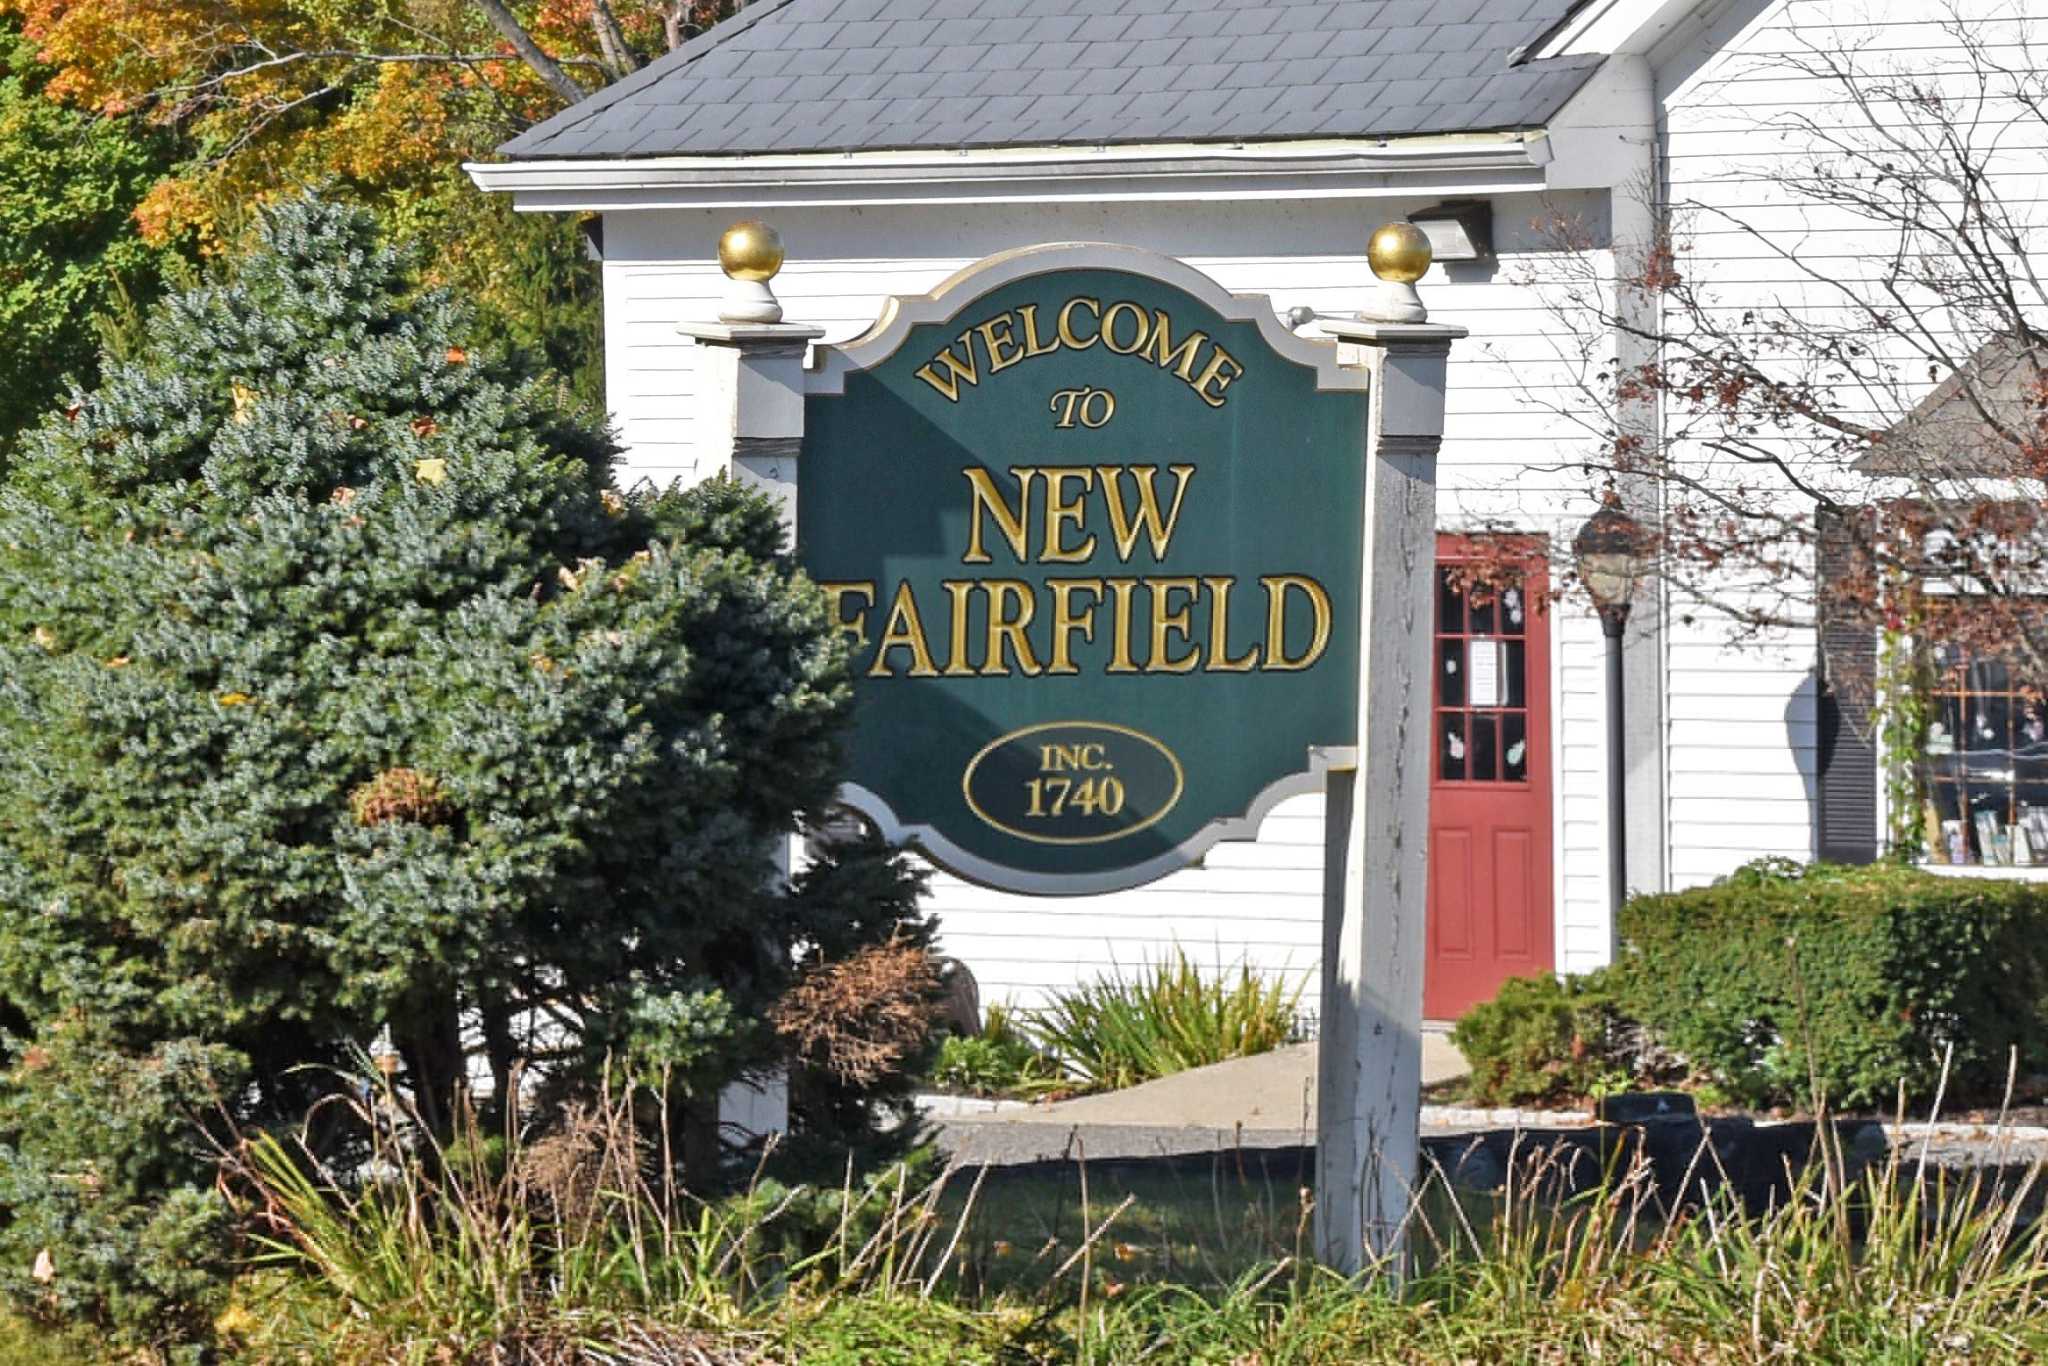 Embattled New Fairfield finance board alternate pitches office hours for members to meet with public